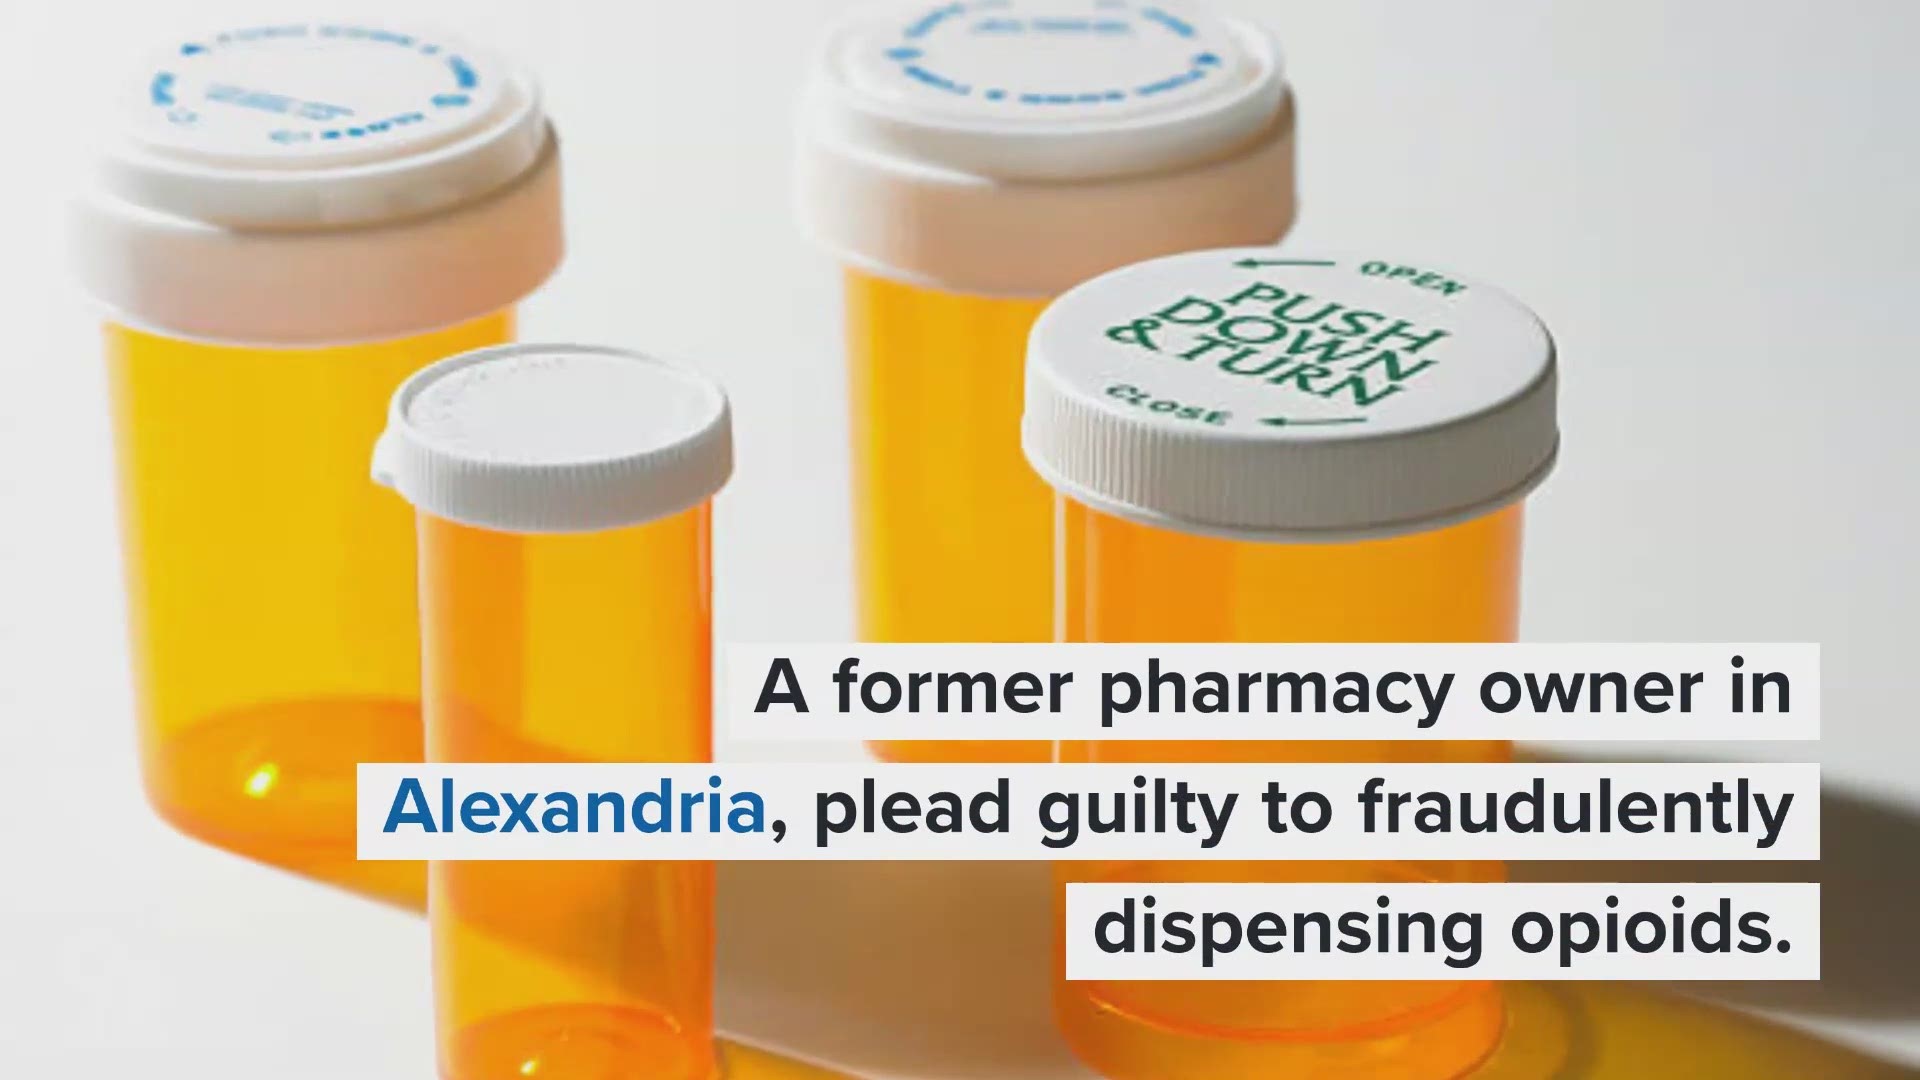 The operator of the now-defunct pharmacies has never been qualified to serve as a licensed pharmacist, the Department of Justice says.